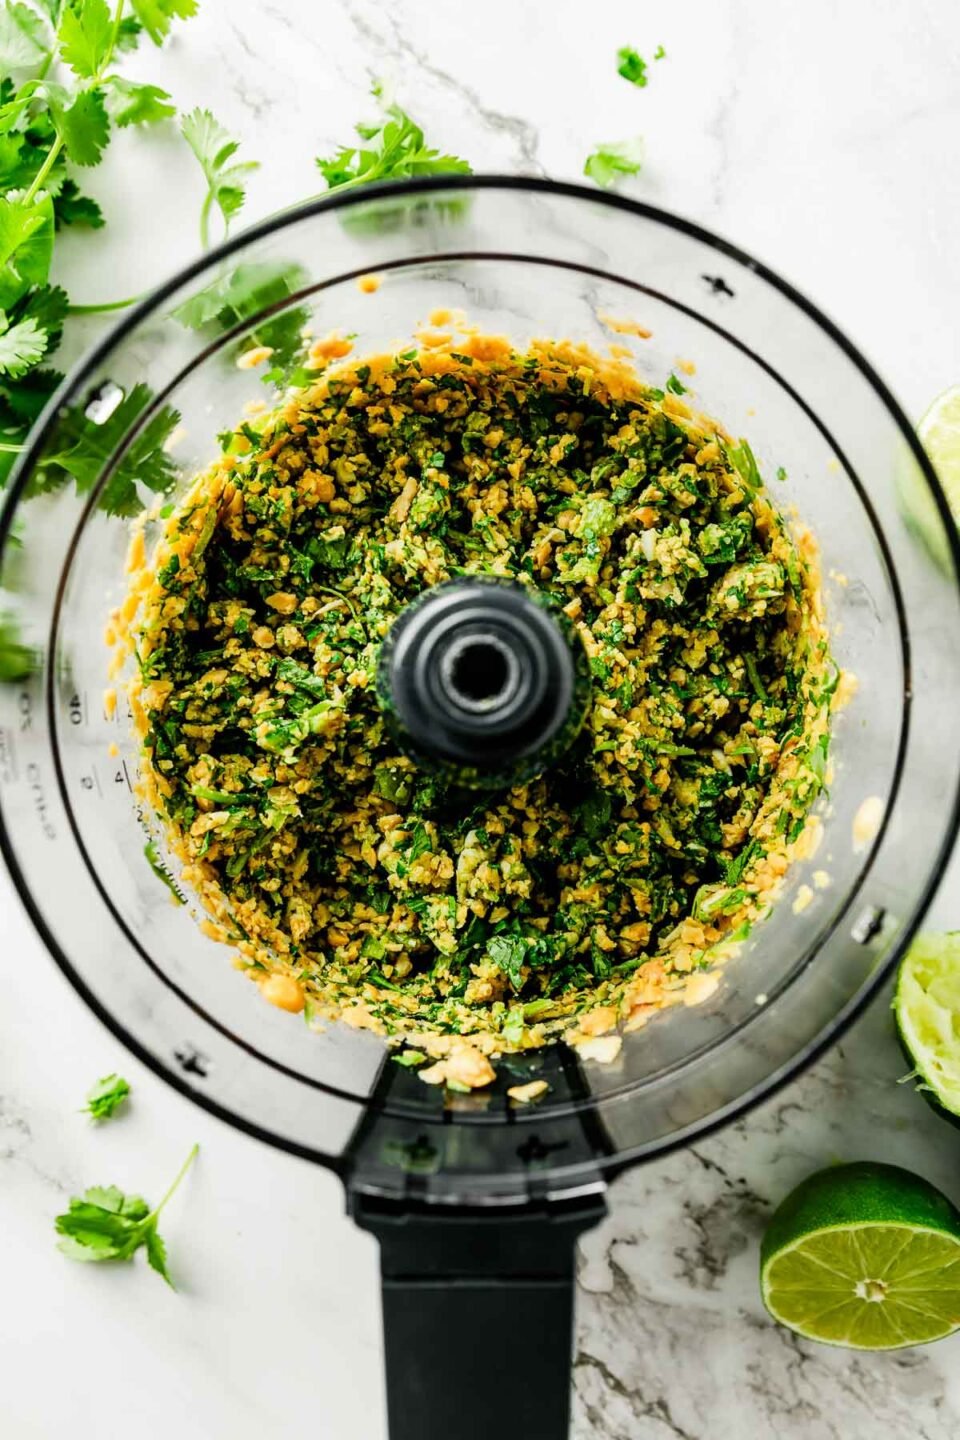 An overhead shot of an uncovered food processor with chopped hummus ingredients atop a white marbled surface.